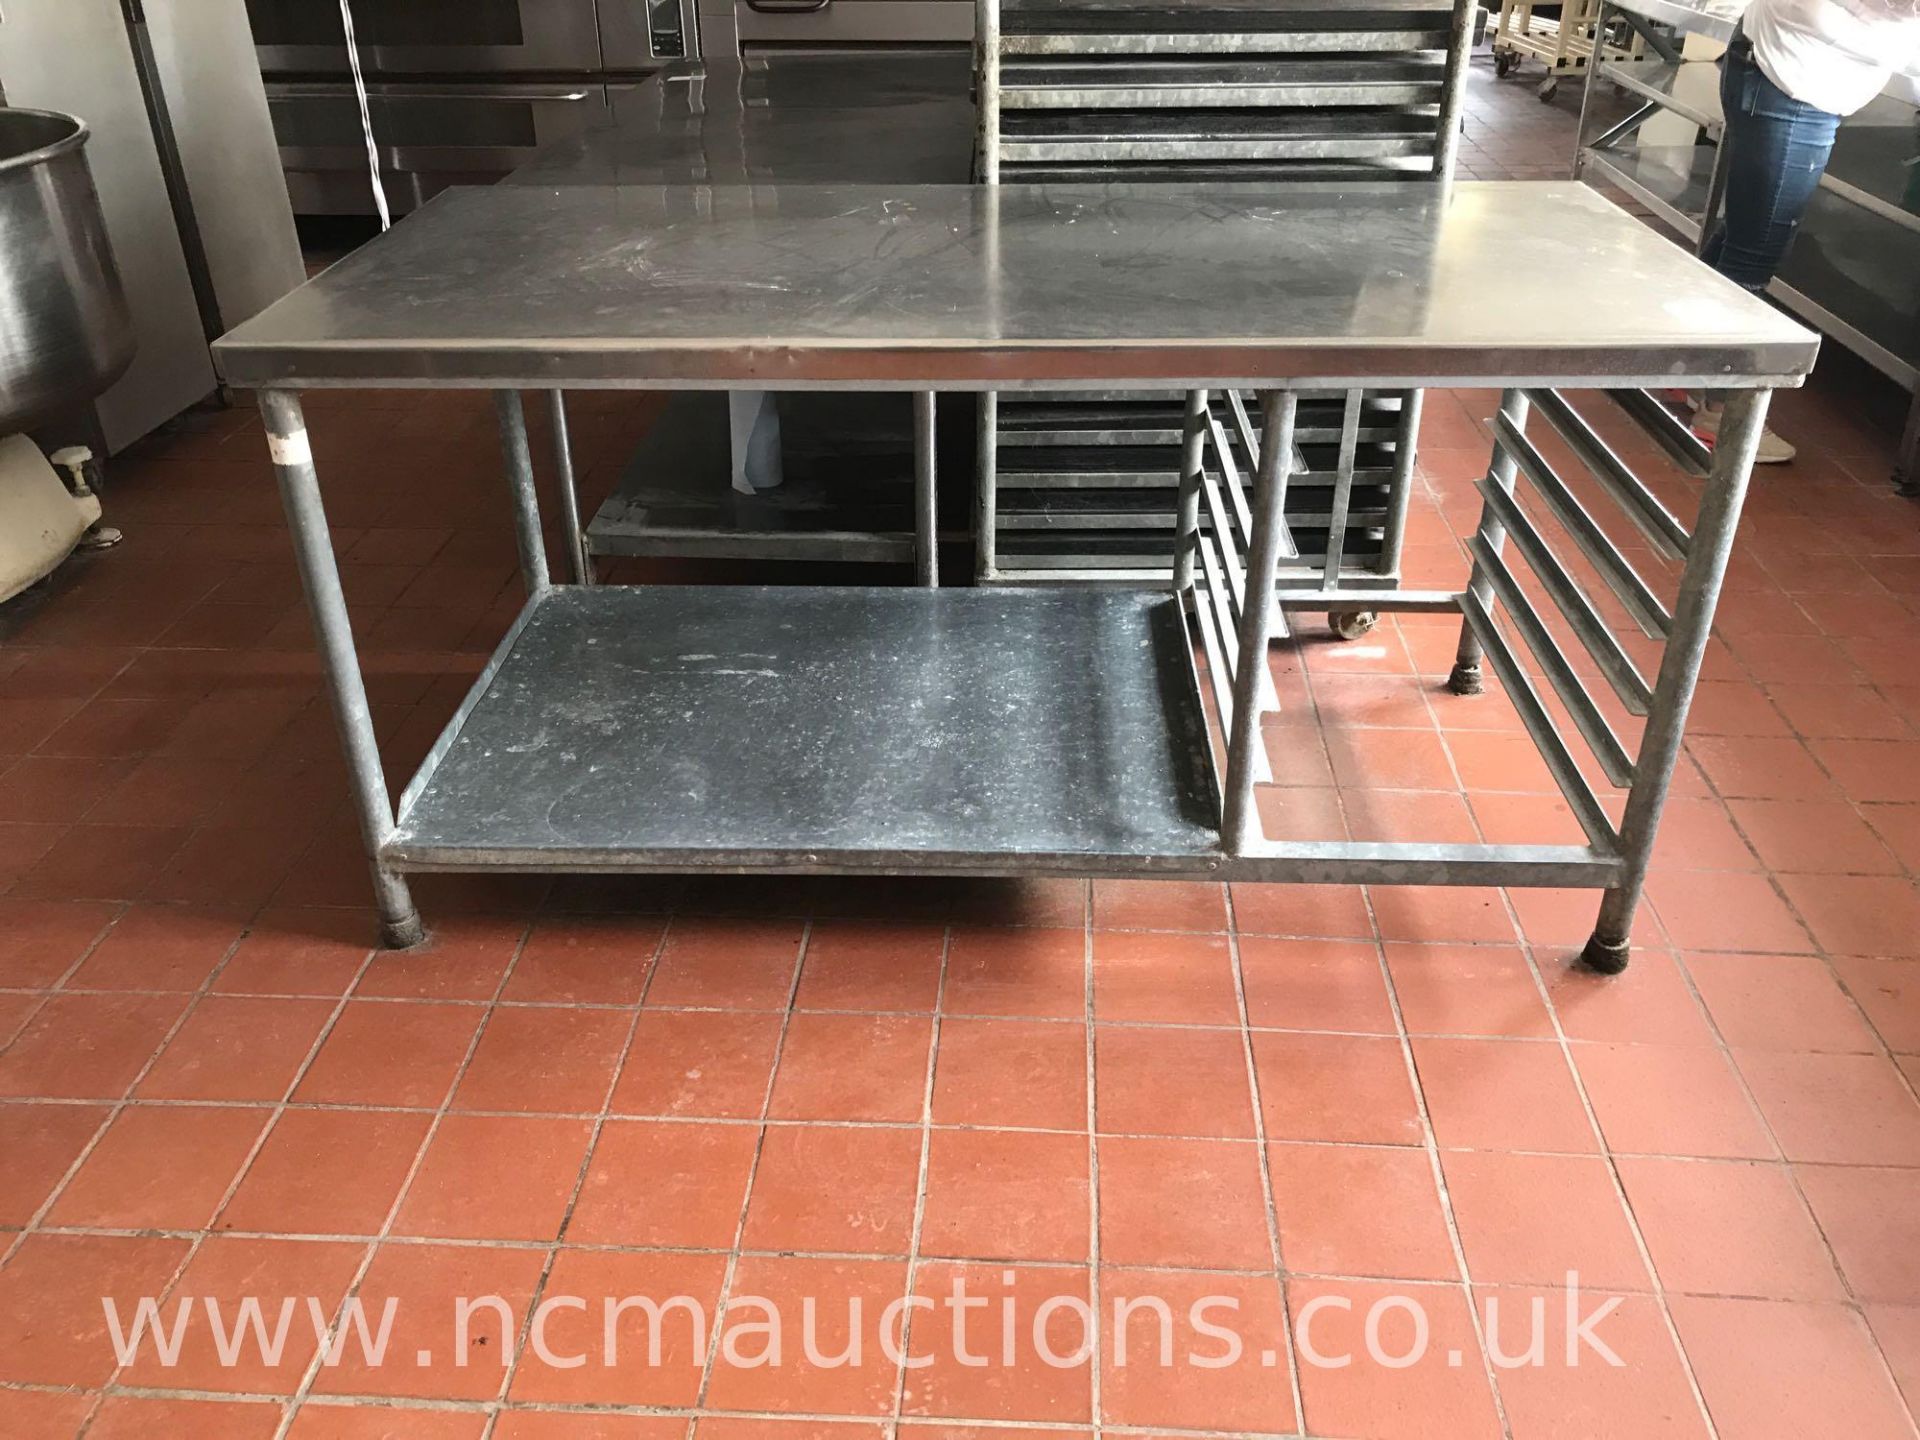 Stainless Steel Preperation Counter with Tray Storage - Image 3 of 3